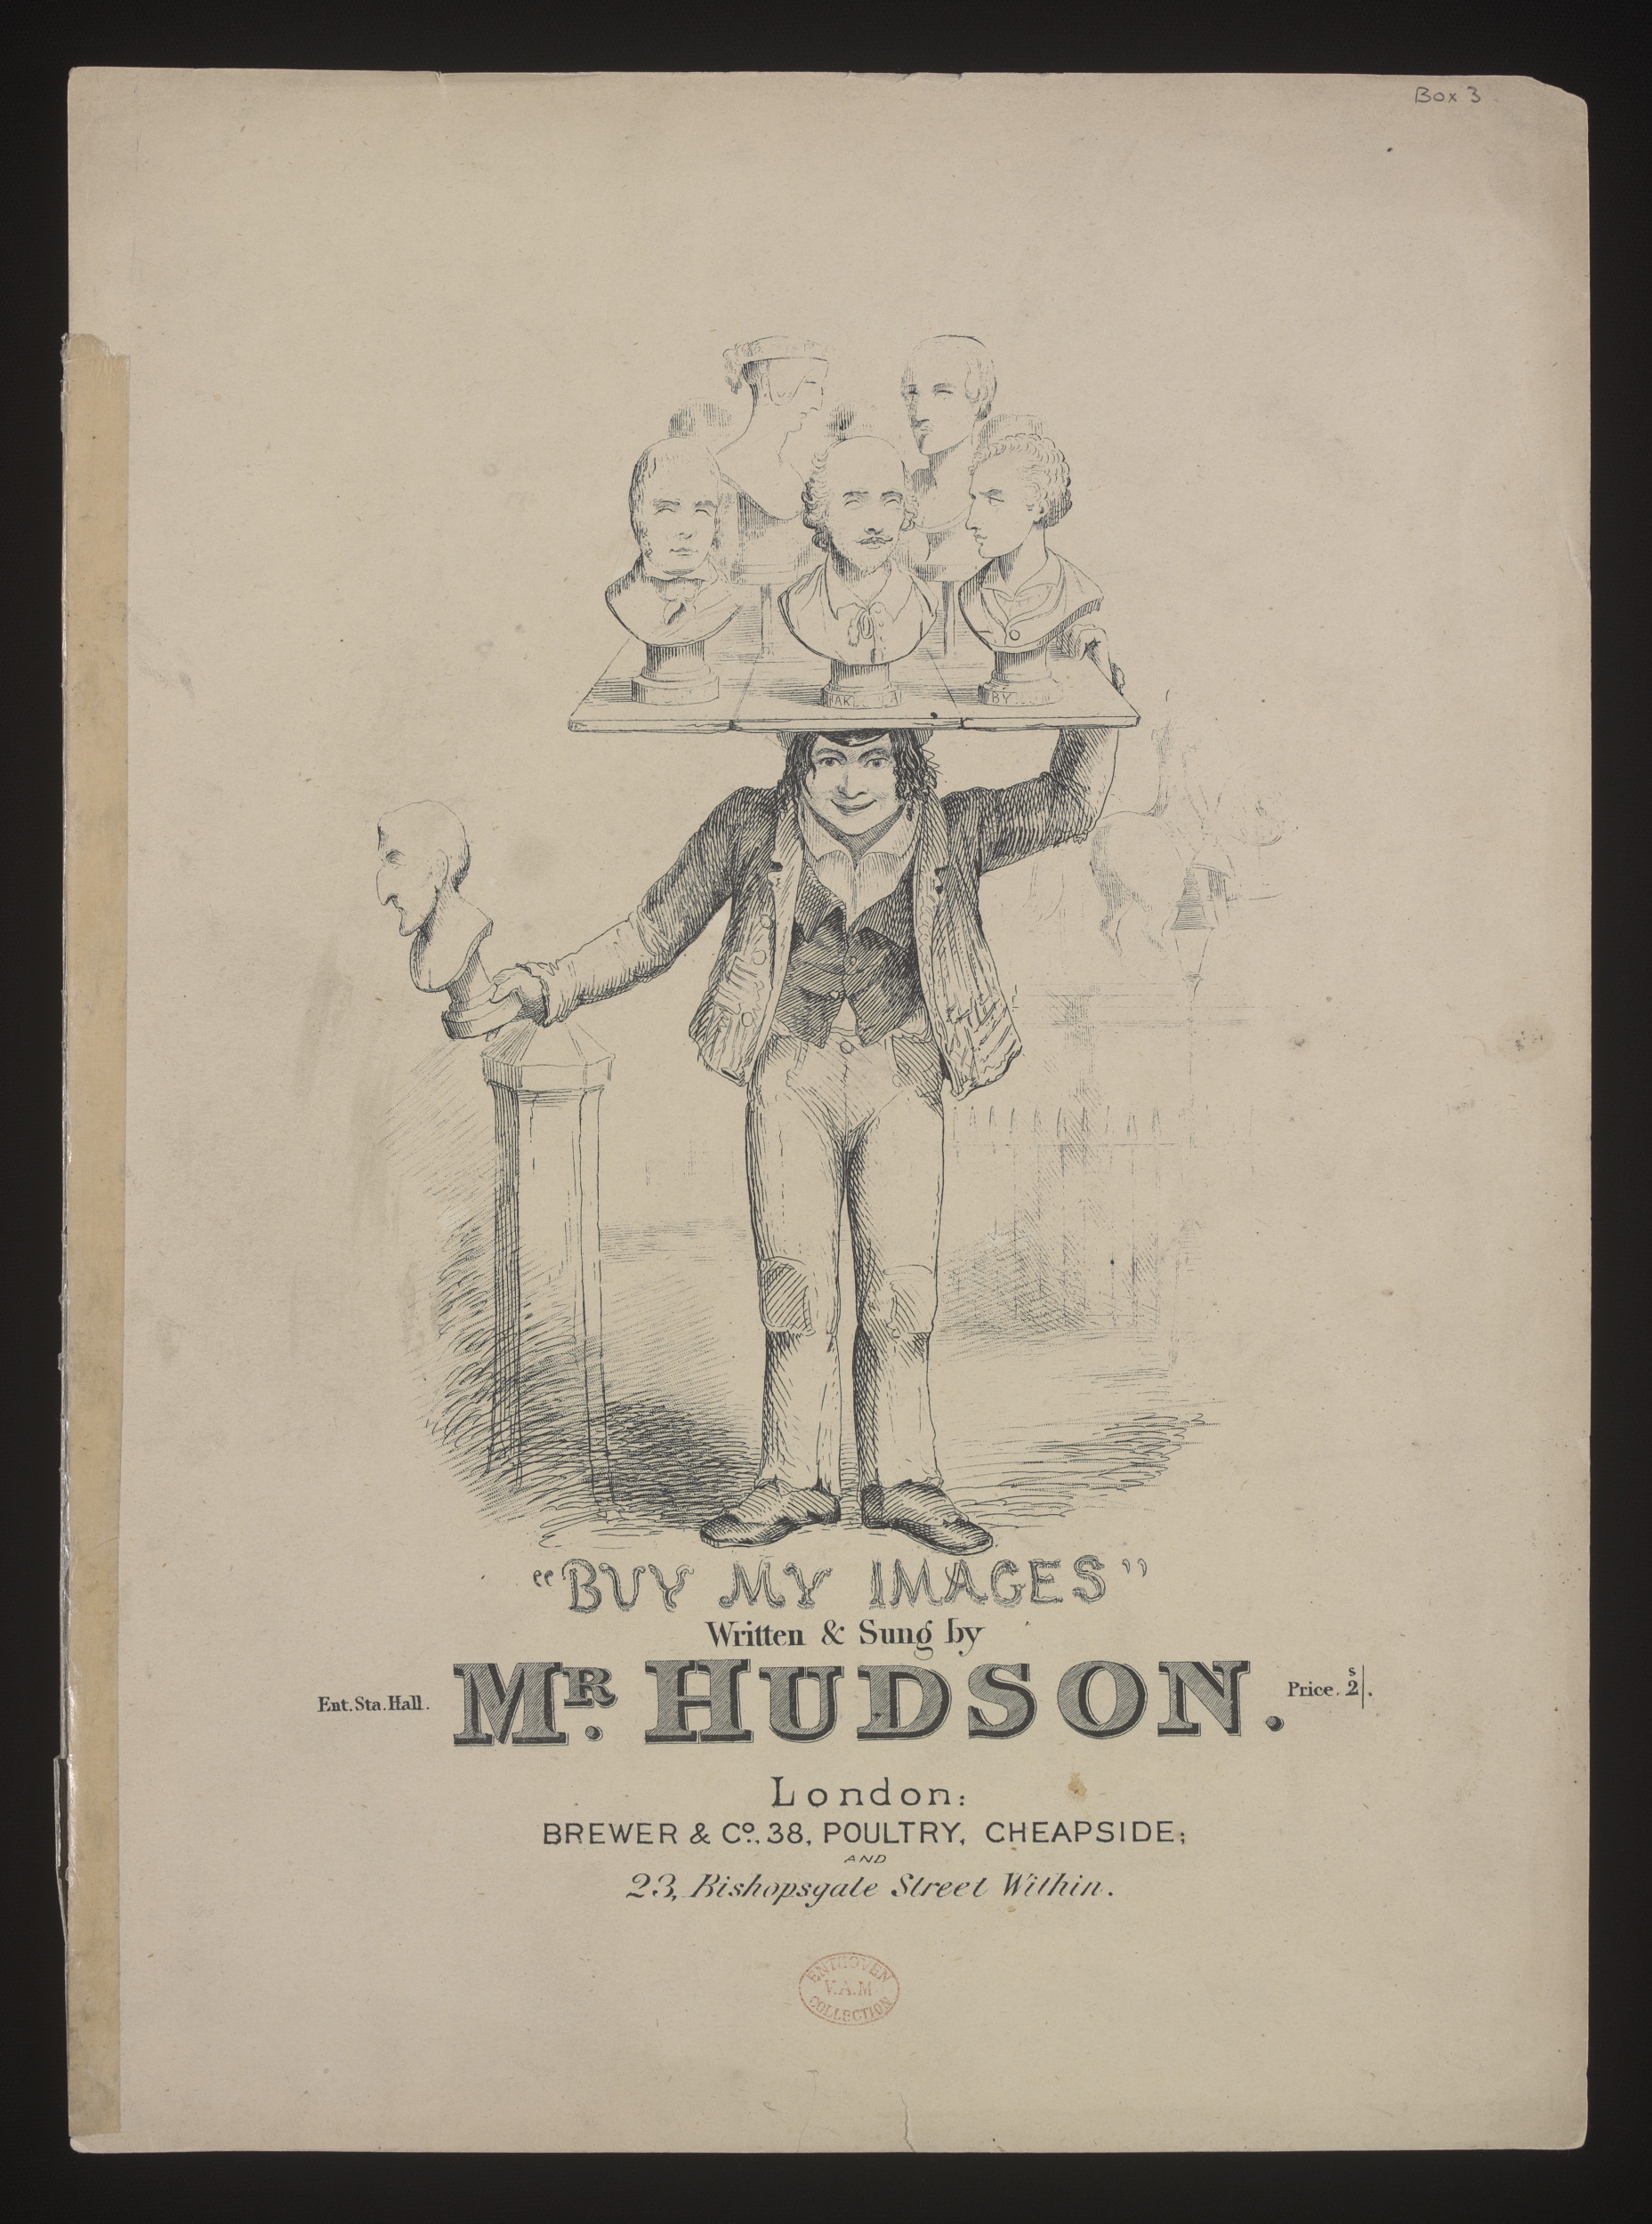 Cover of sheet music of song Buy My Images, showing an image-seller